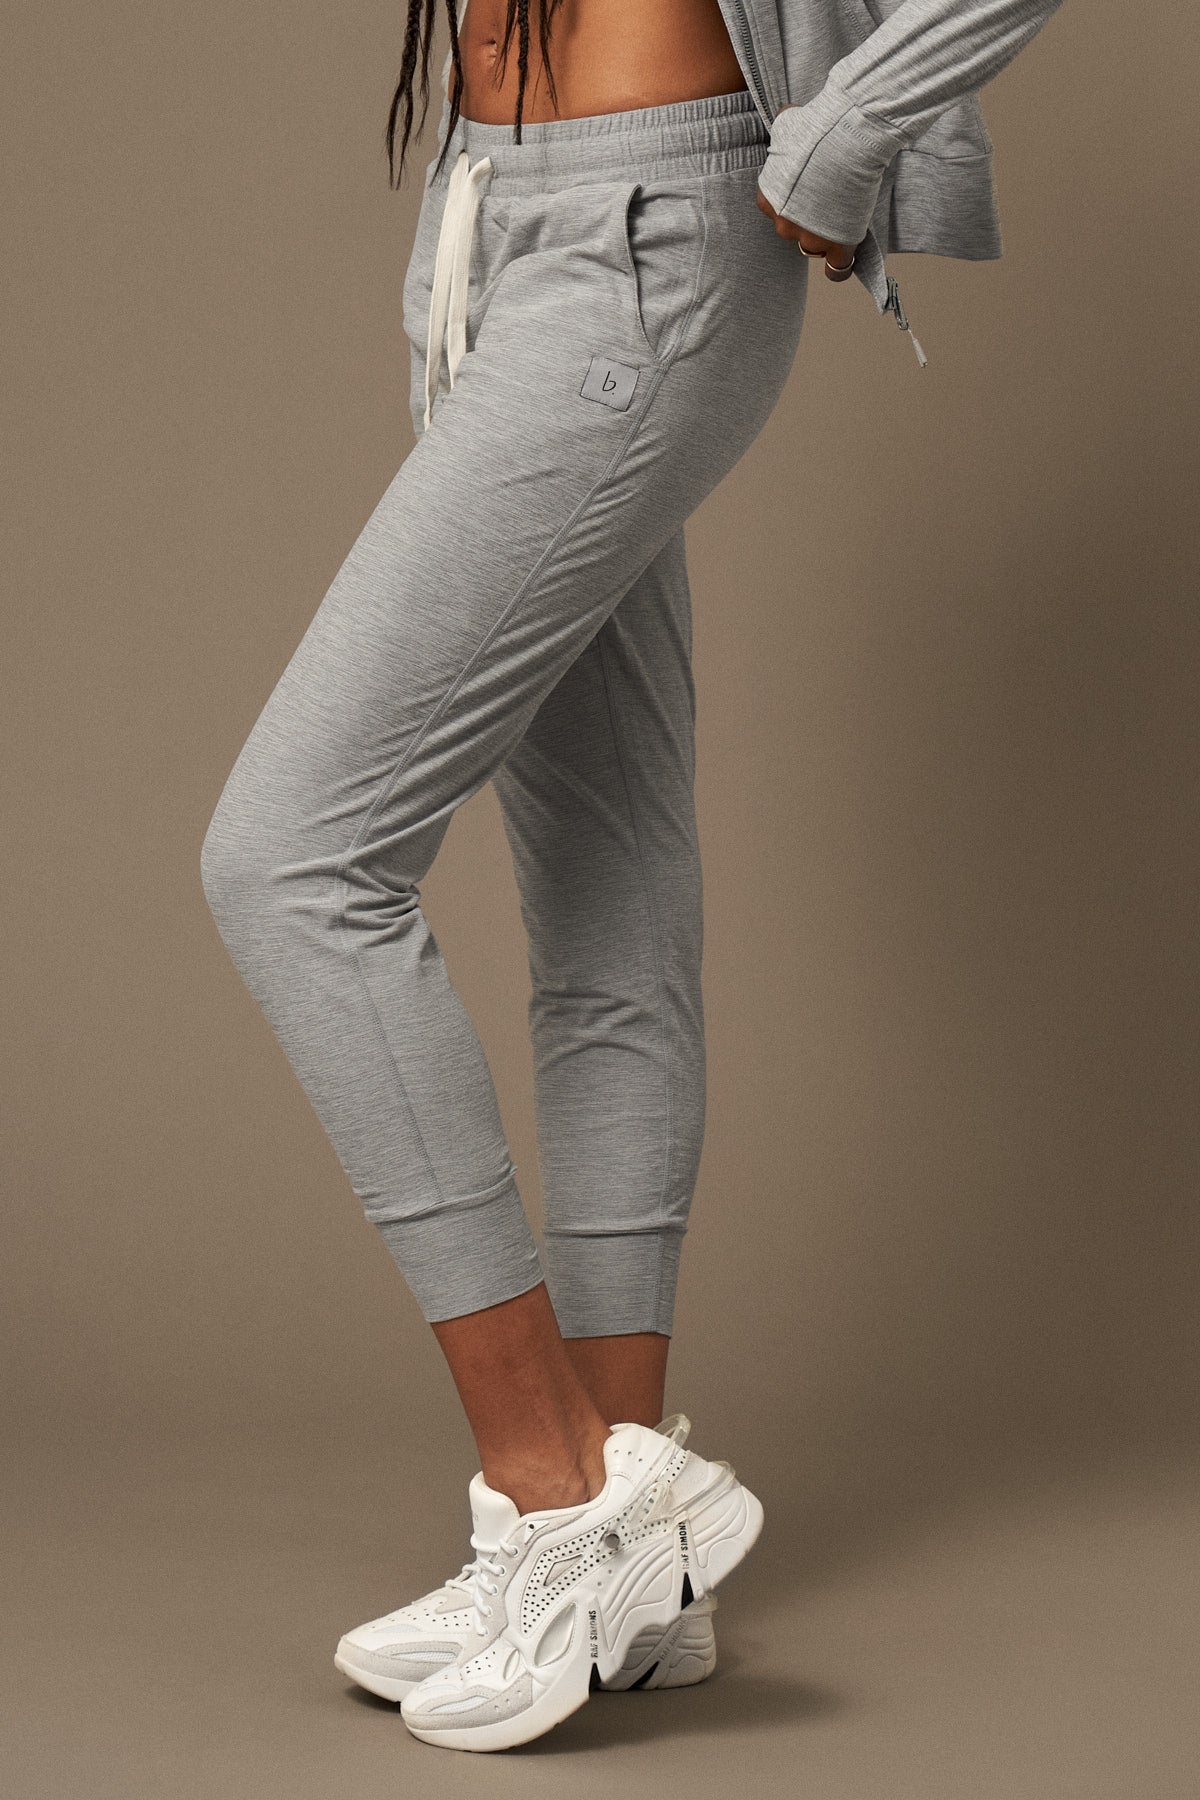 Easy Jacket in Grey Melange-Jackets-Store Clothes Sustainable Recycled Yoga Leggings Women On-line Barcelona Believe Athletics Sustainable Recycled Yoga Clothes